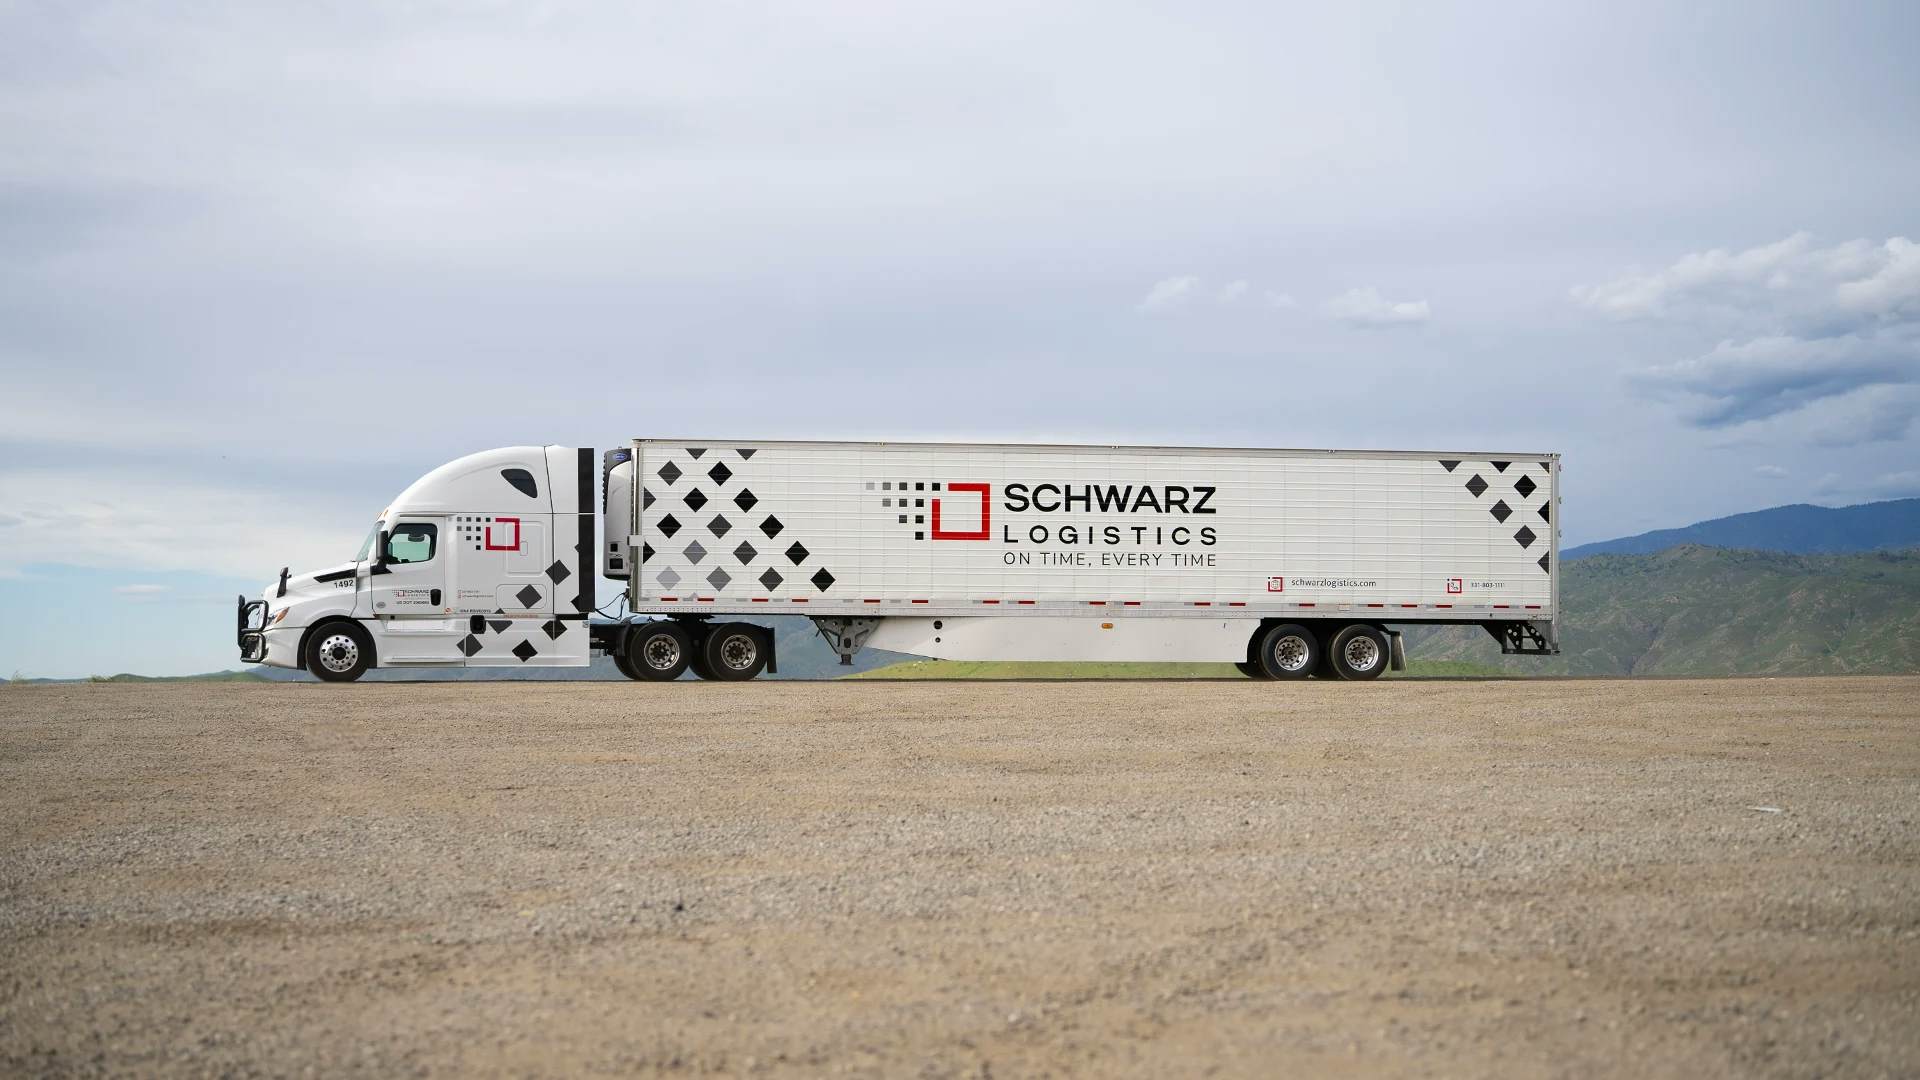 A white semi-truck with a large trailer parked on a flat, dry landscape. The trailer is branded with the name "SCHWARZ LOGISTICS" along with the slogan "ON TIME, EVERY TIME" and a geometric diamond pattern on its side. In the background, we see rolling hills under a cloudy sky, suggesting a vast, open rural or semi-arid environment. The truck appears stationary, likely captured in a moment between deliveries or while on a break during a long haul.